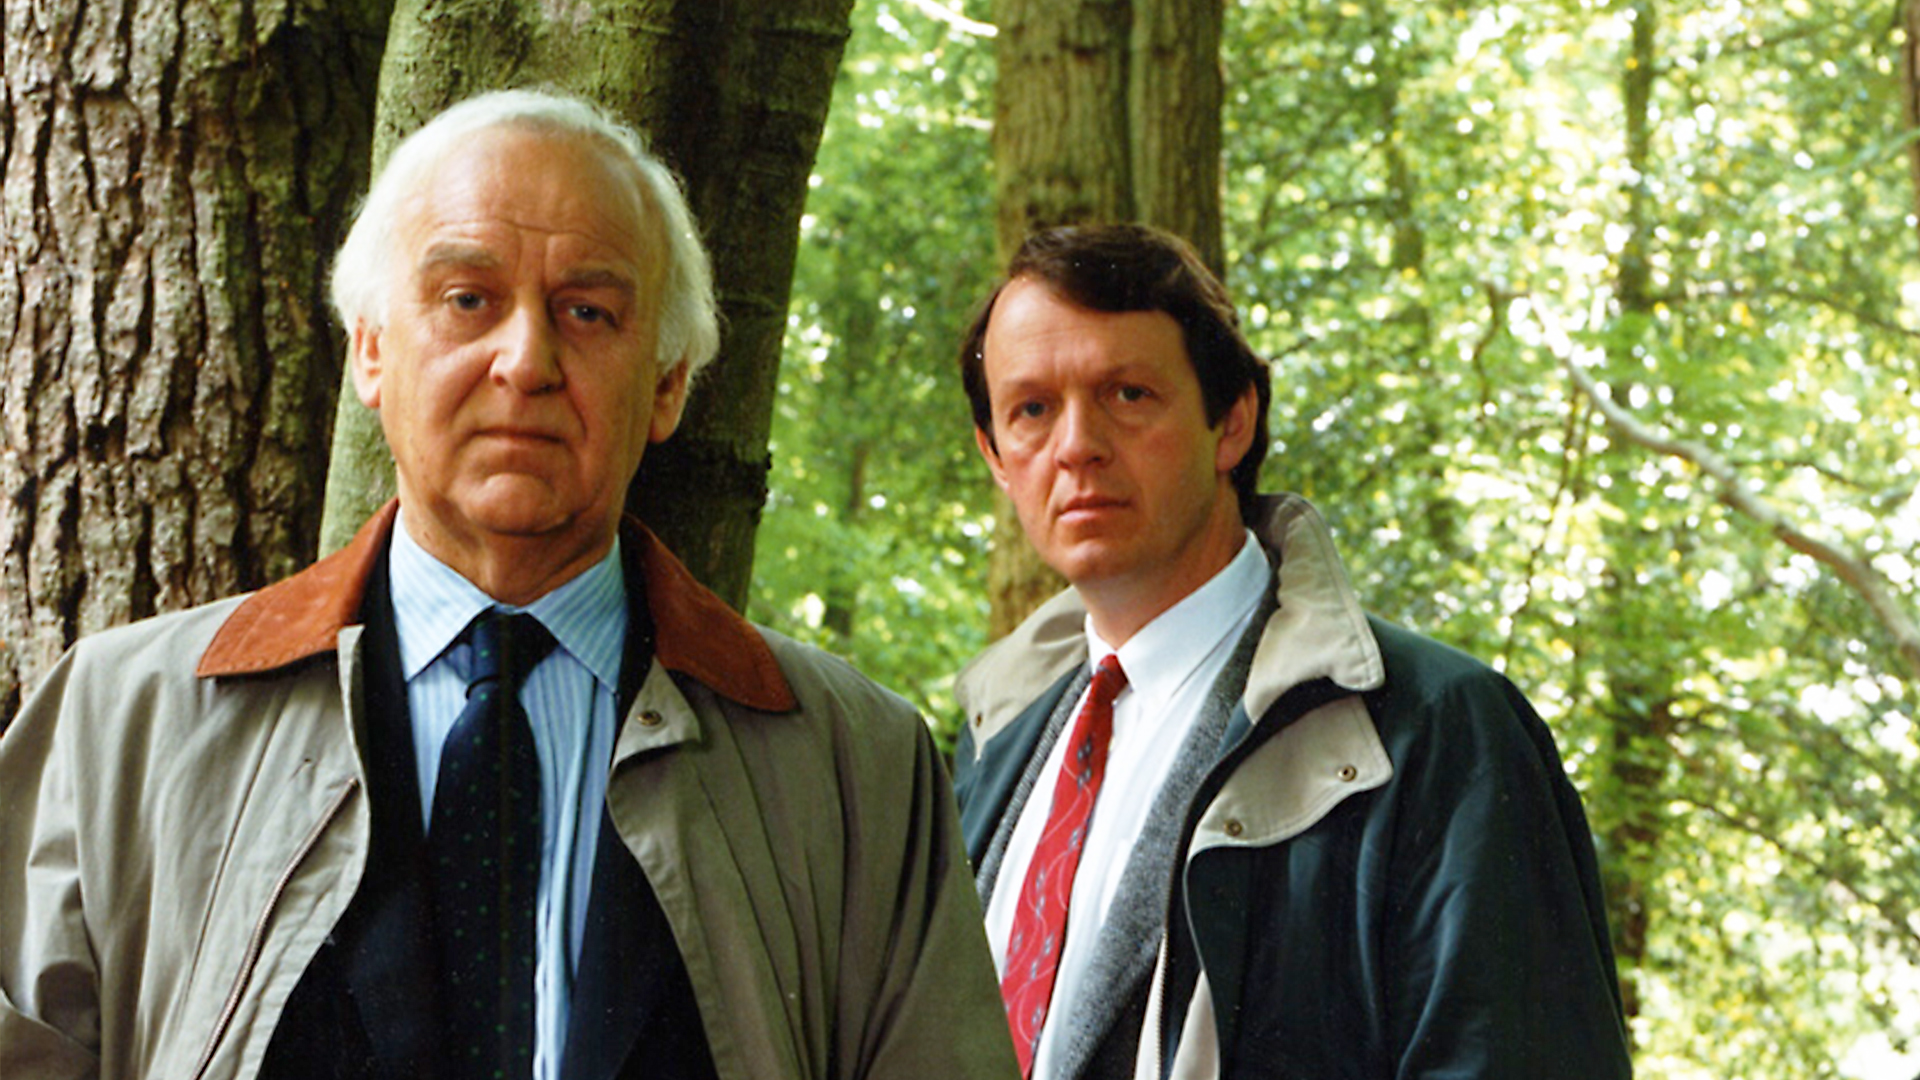 Inspector Morse - Specials E1 - The Way Through the Woods